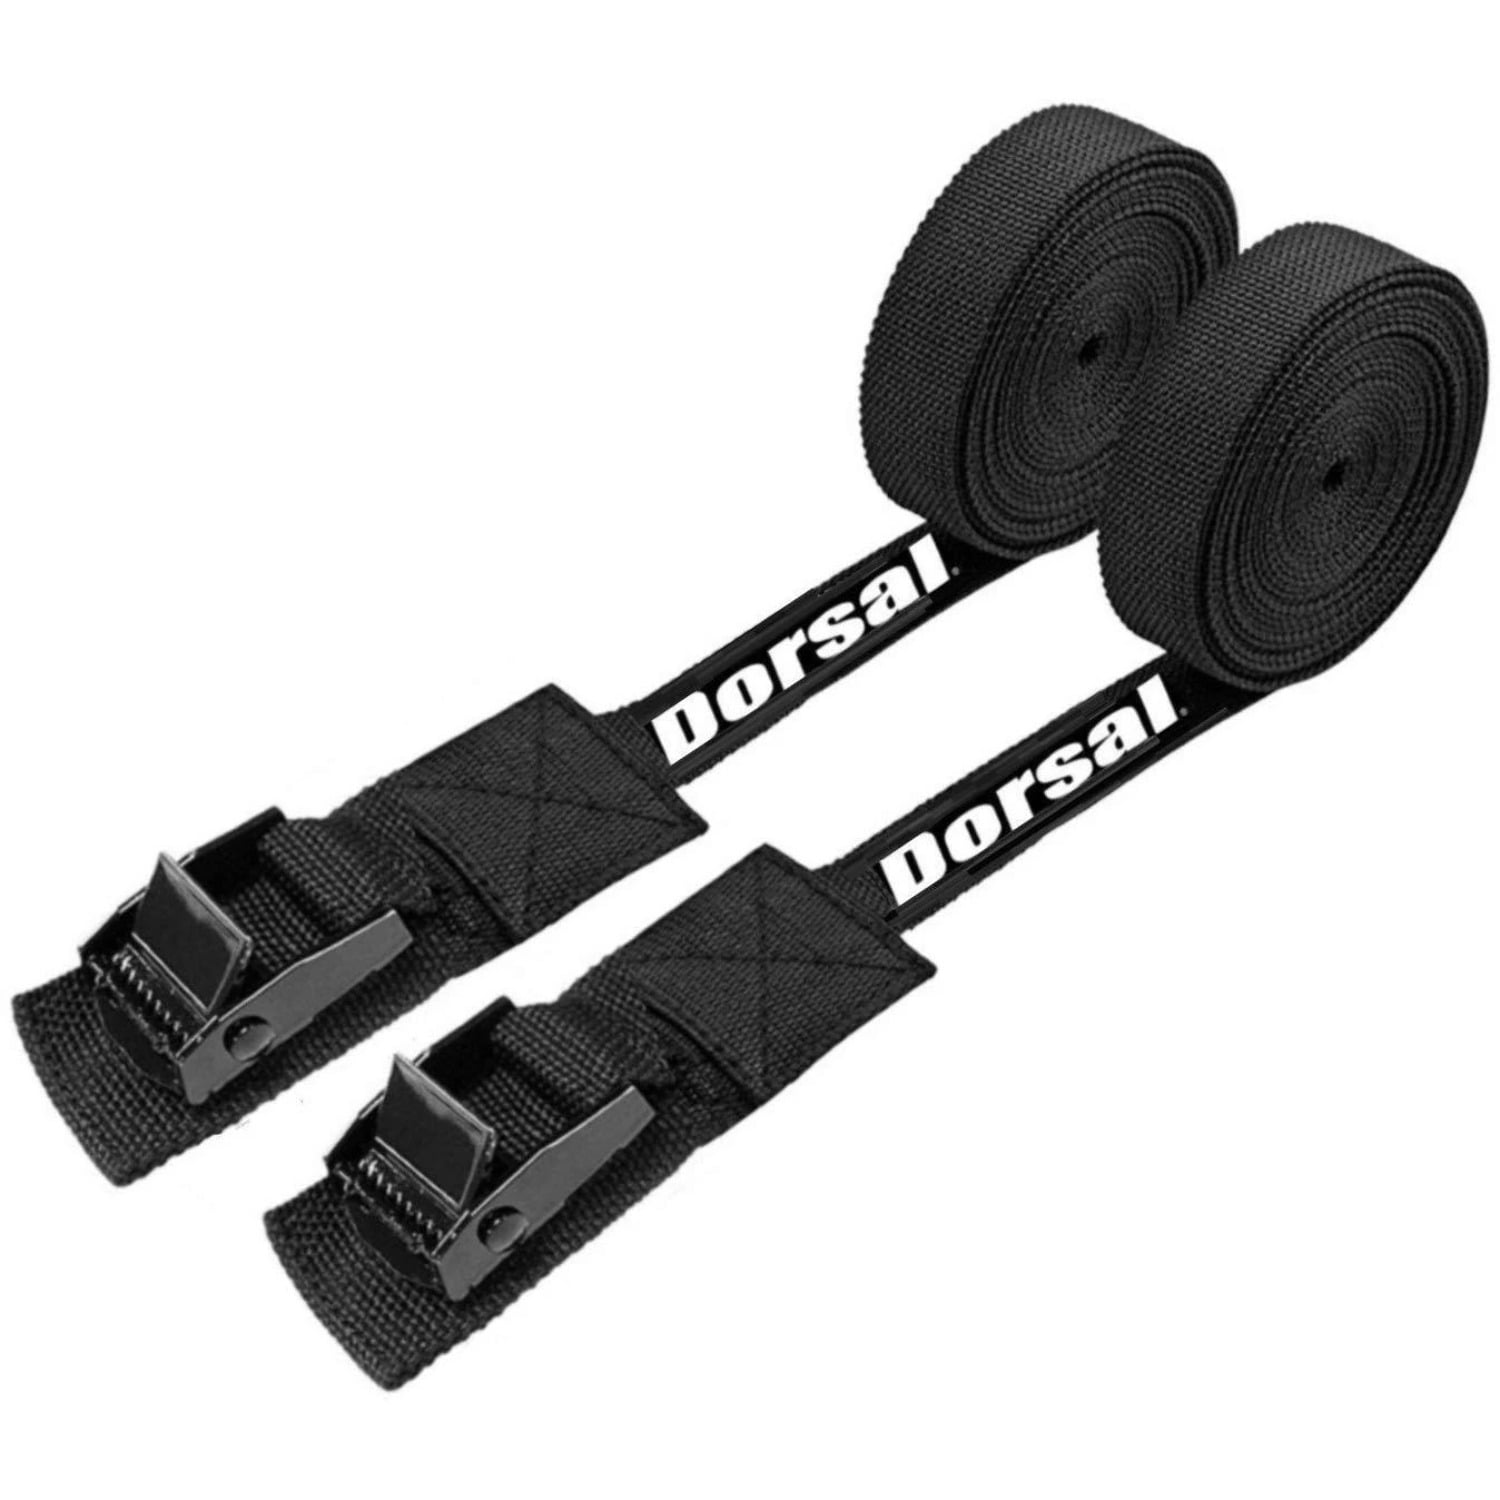 Set of 2 Kayak Webbing Strap Roof Rack Tie Downs with Quick Release Buckle 